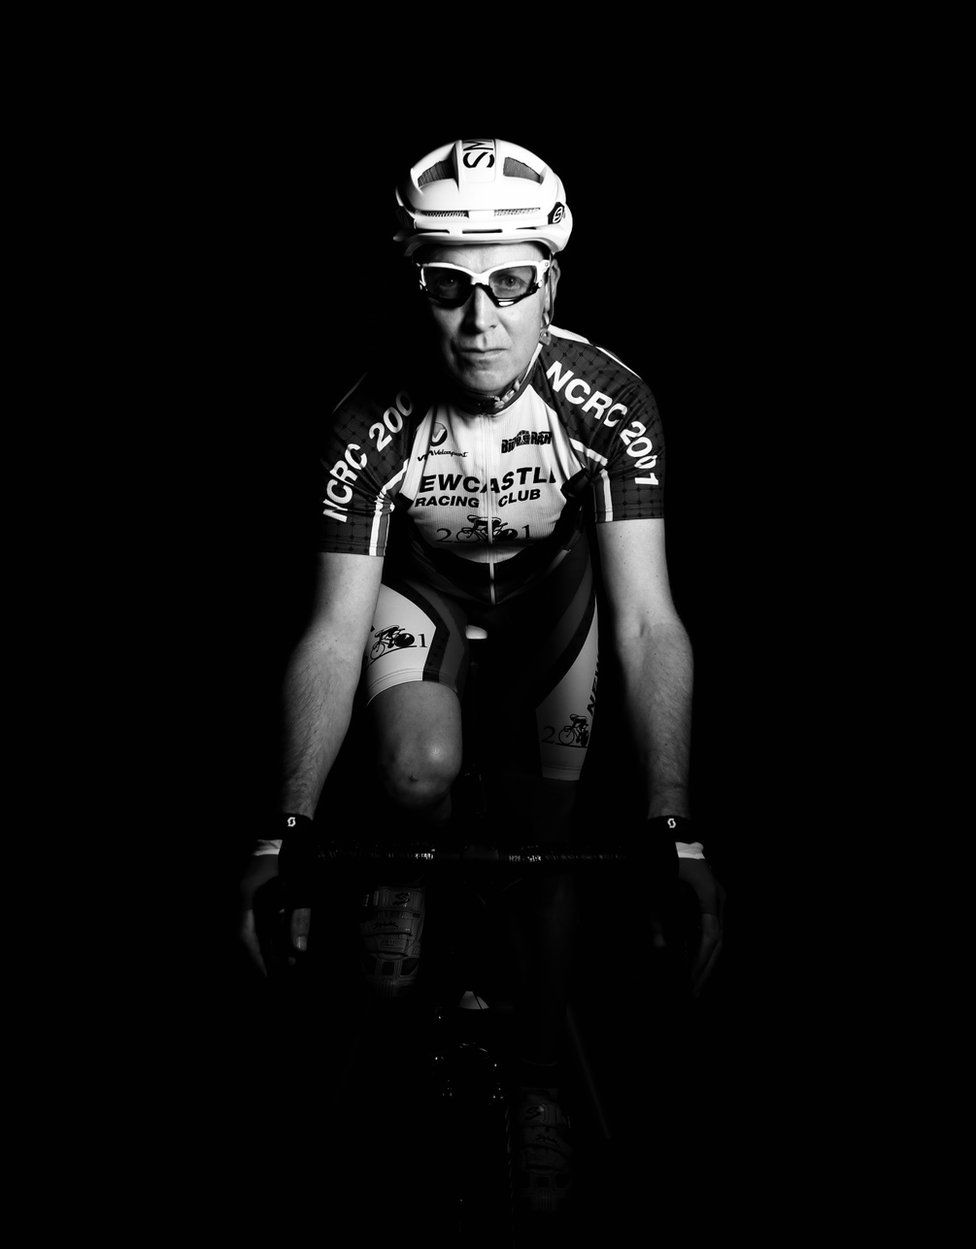 A cyclist emerging from the darkness